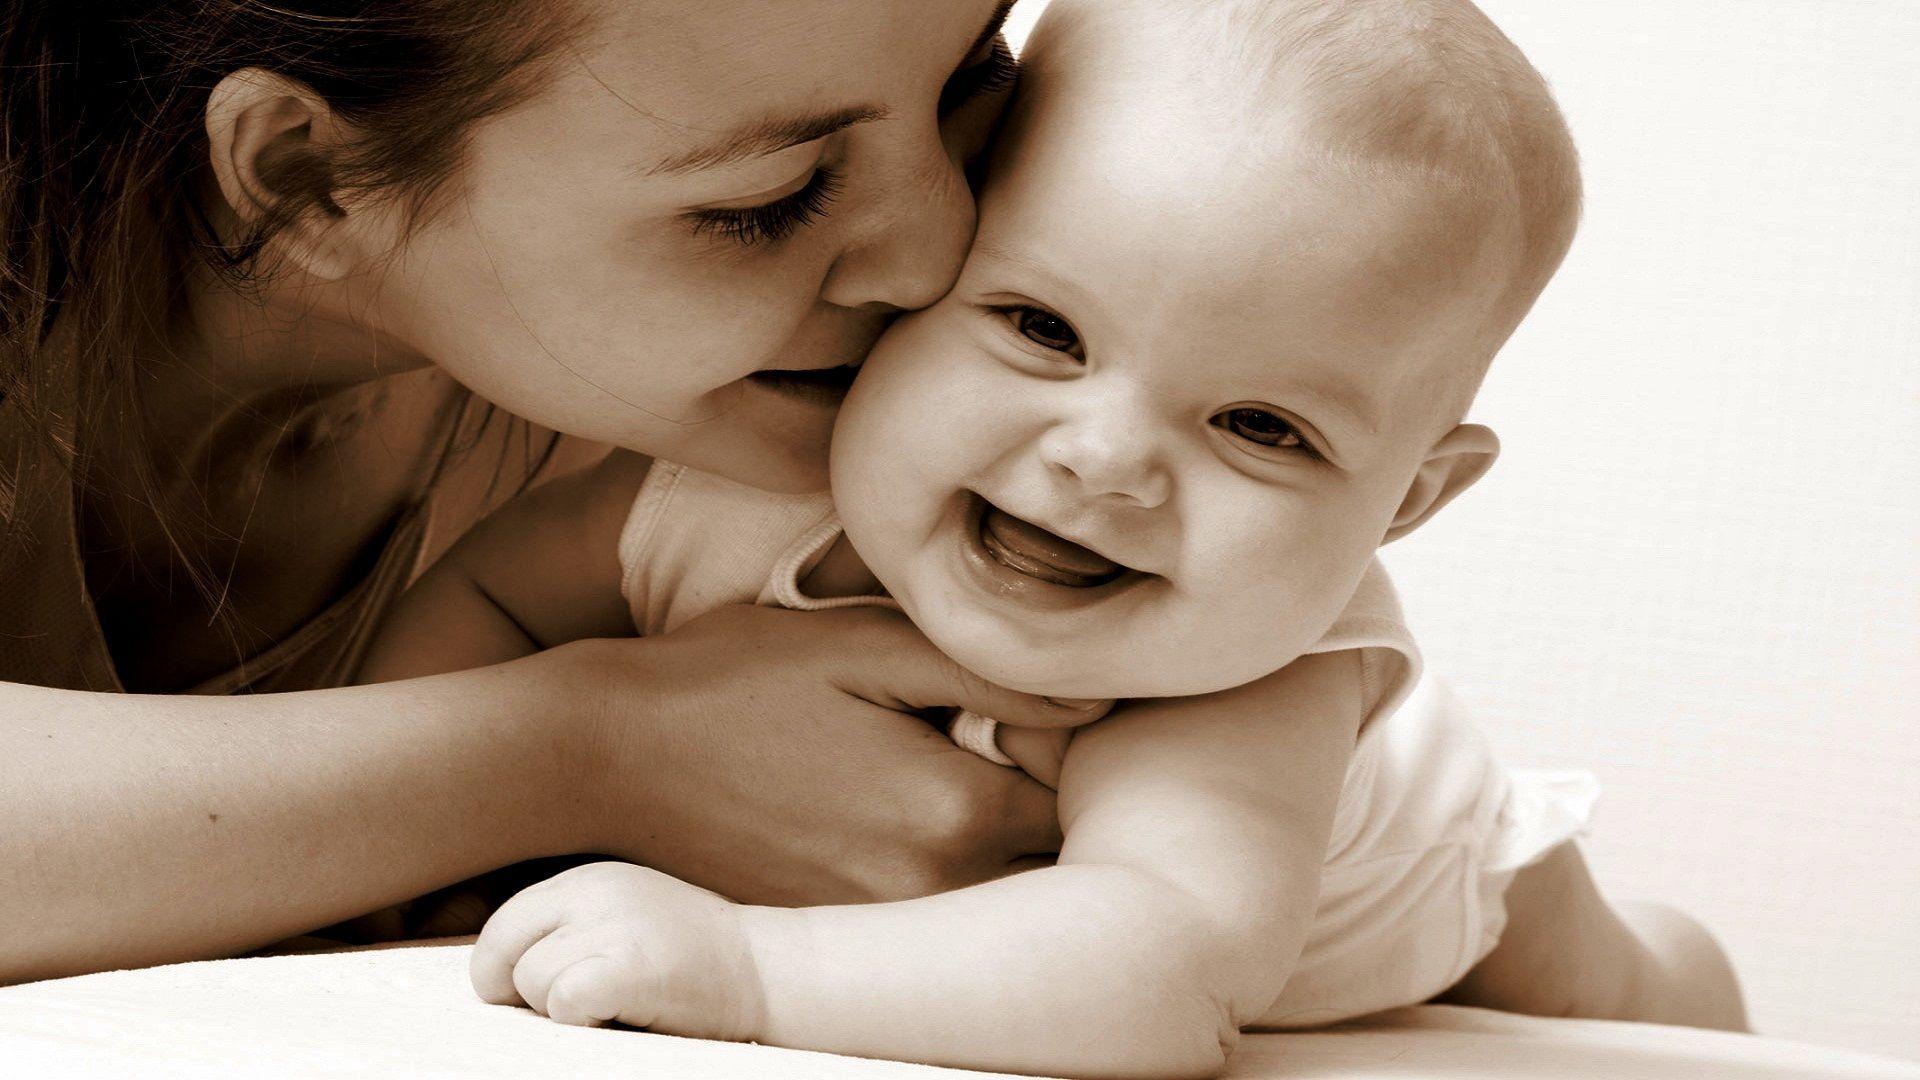 Baby And Mom Wallpapers - Wallpaper Cave